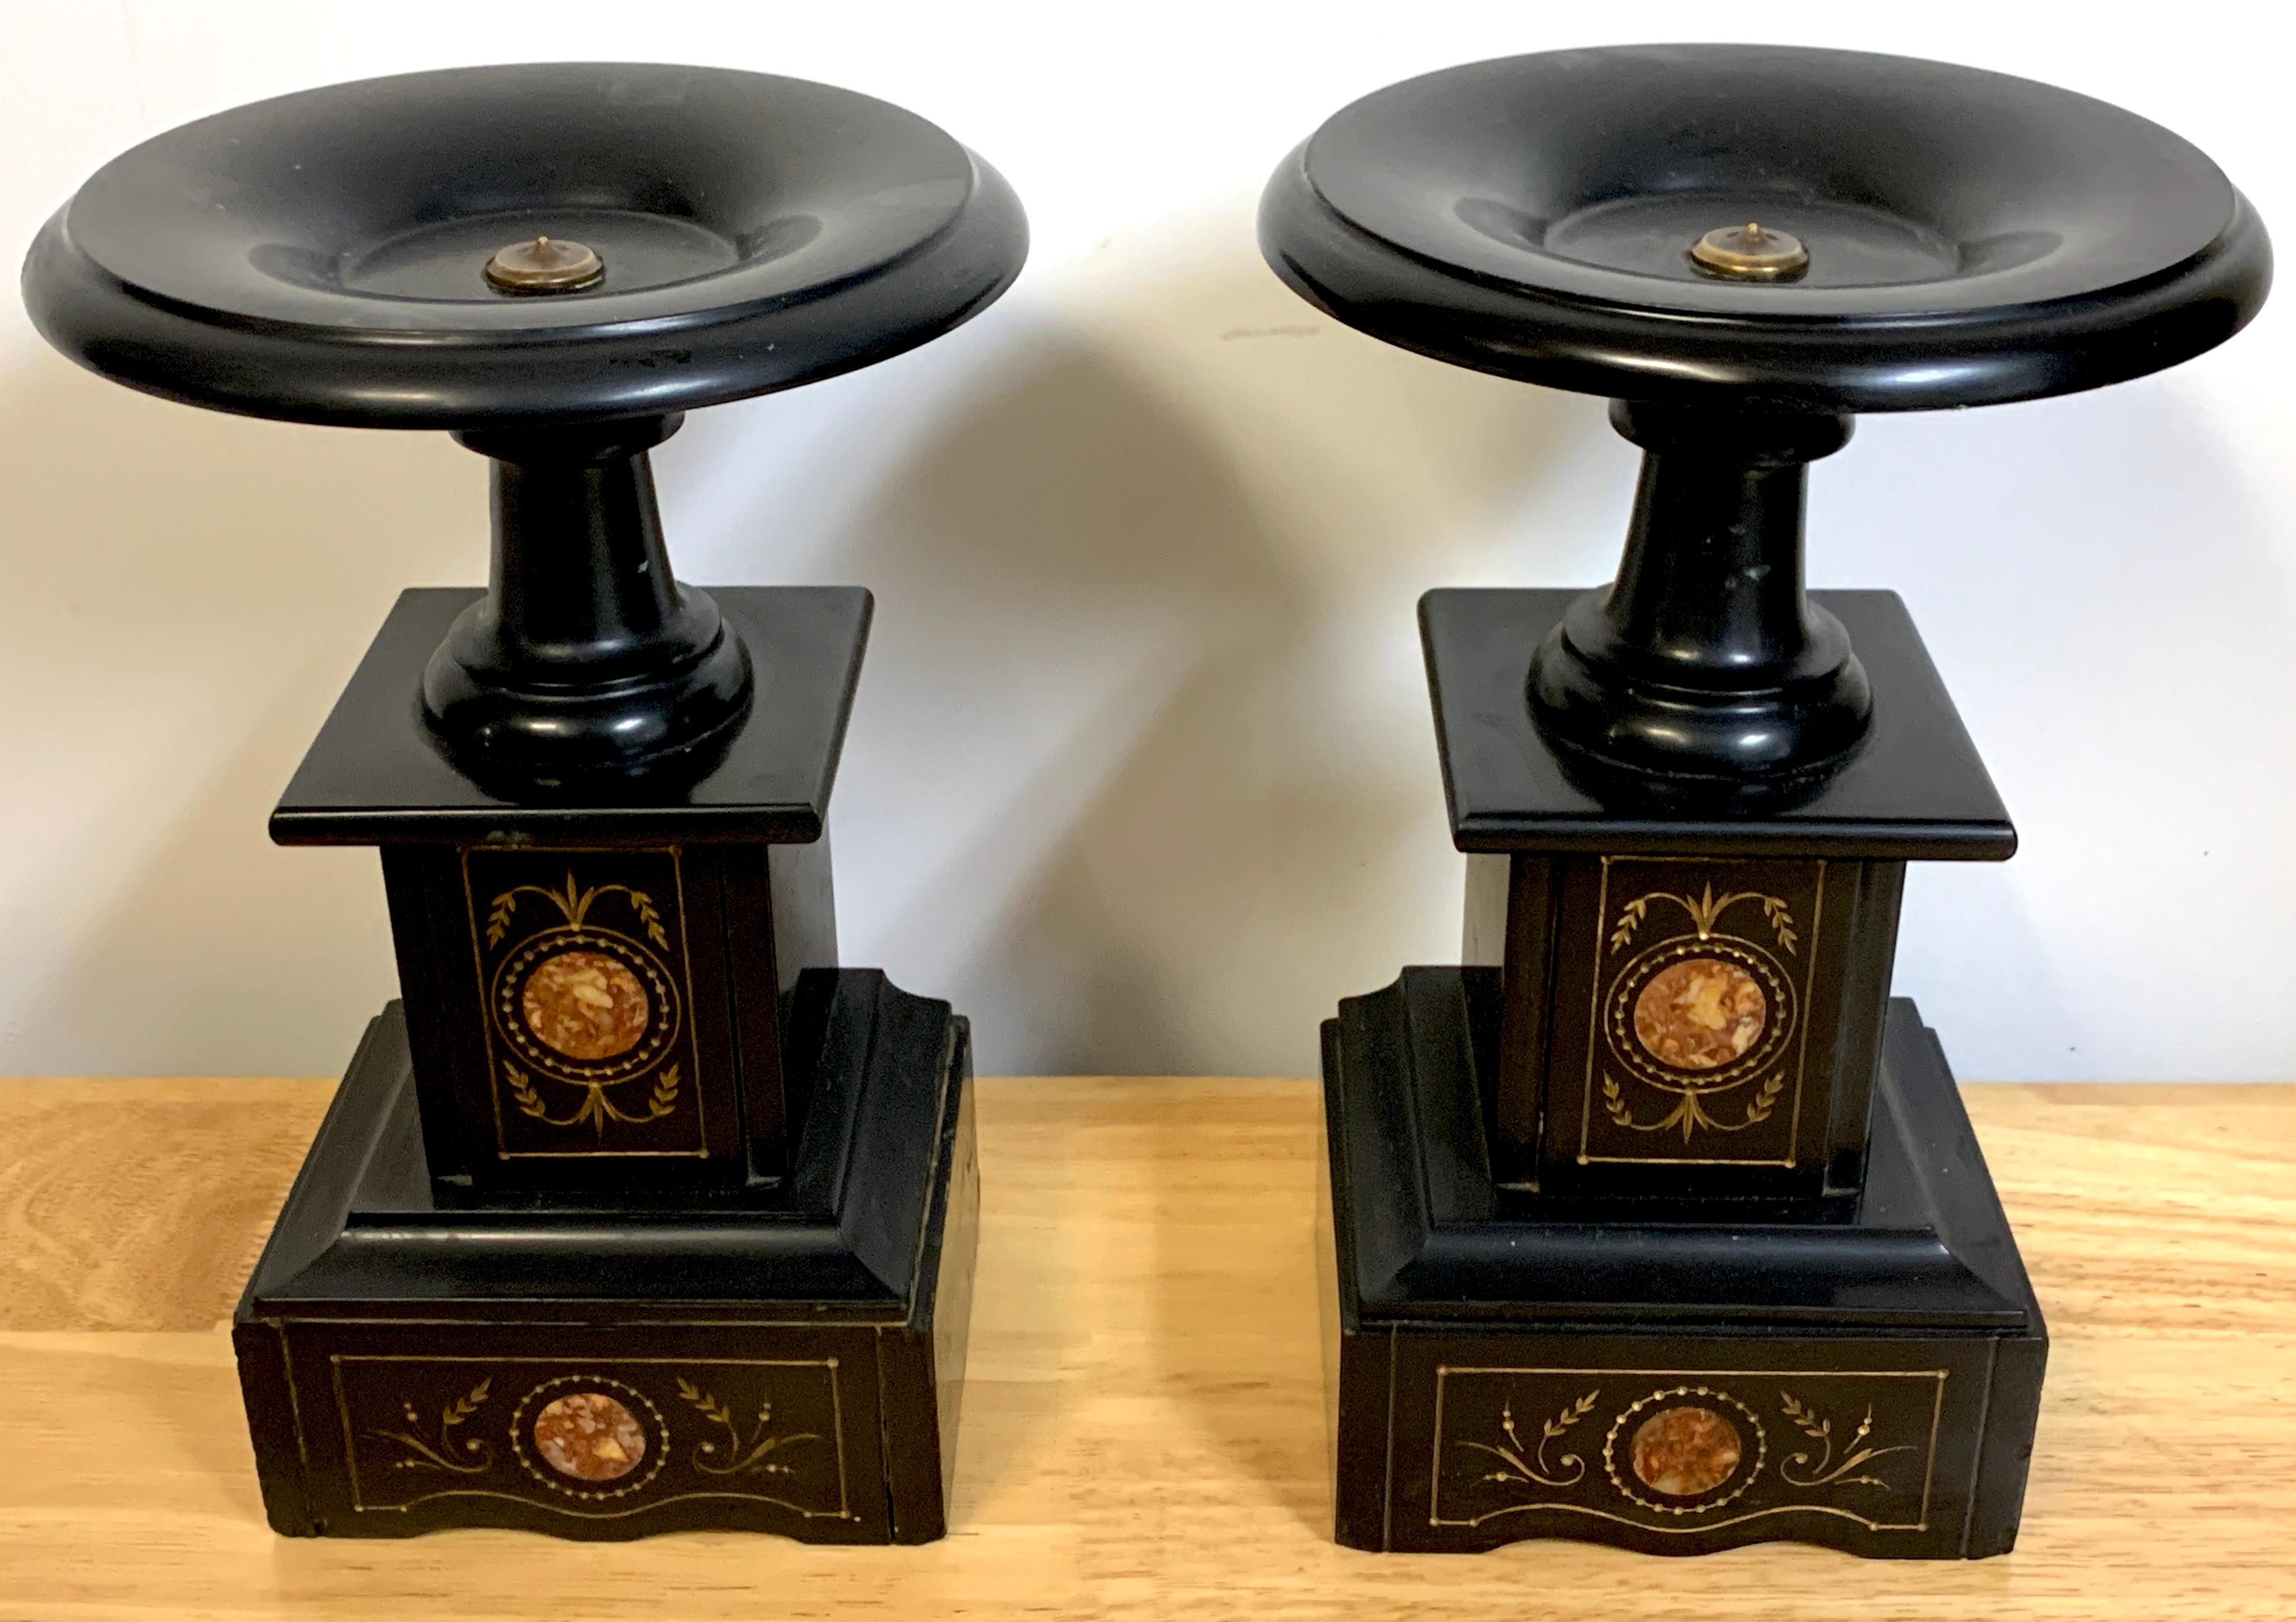 Pair of 19th Century Italian Grand Tour Inlaid Black Marble Tazza For Sale 8